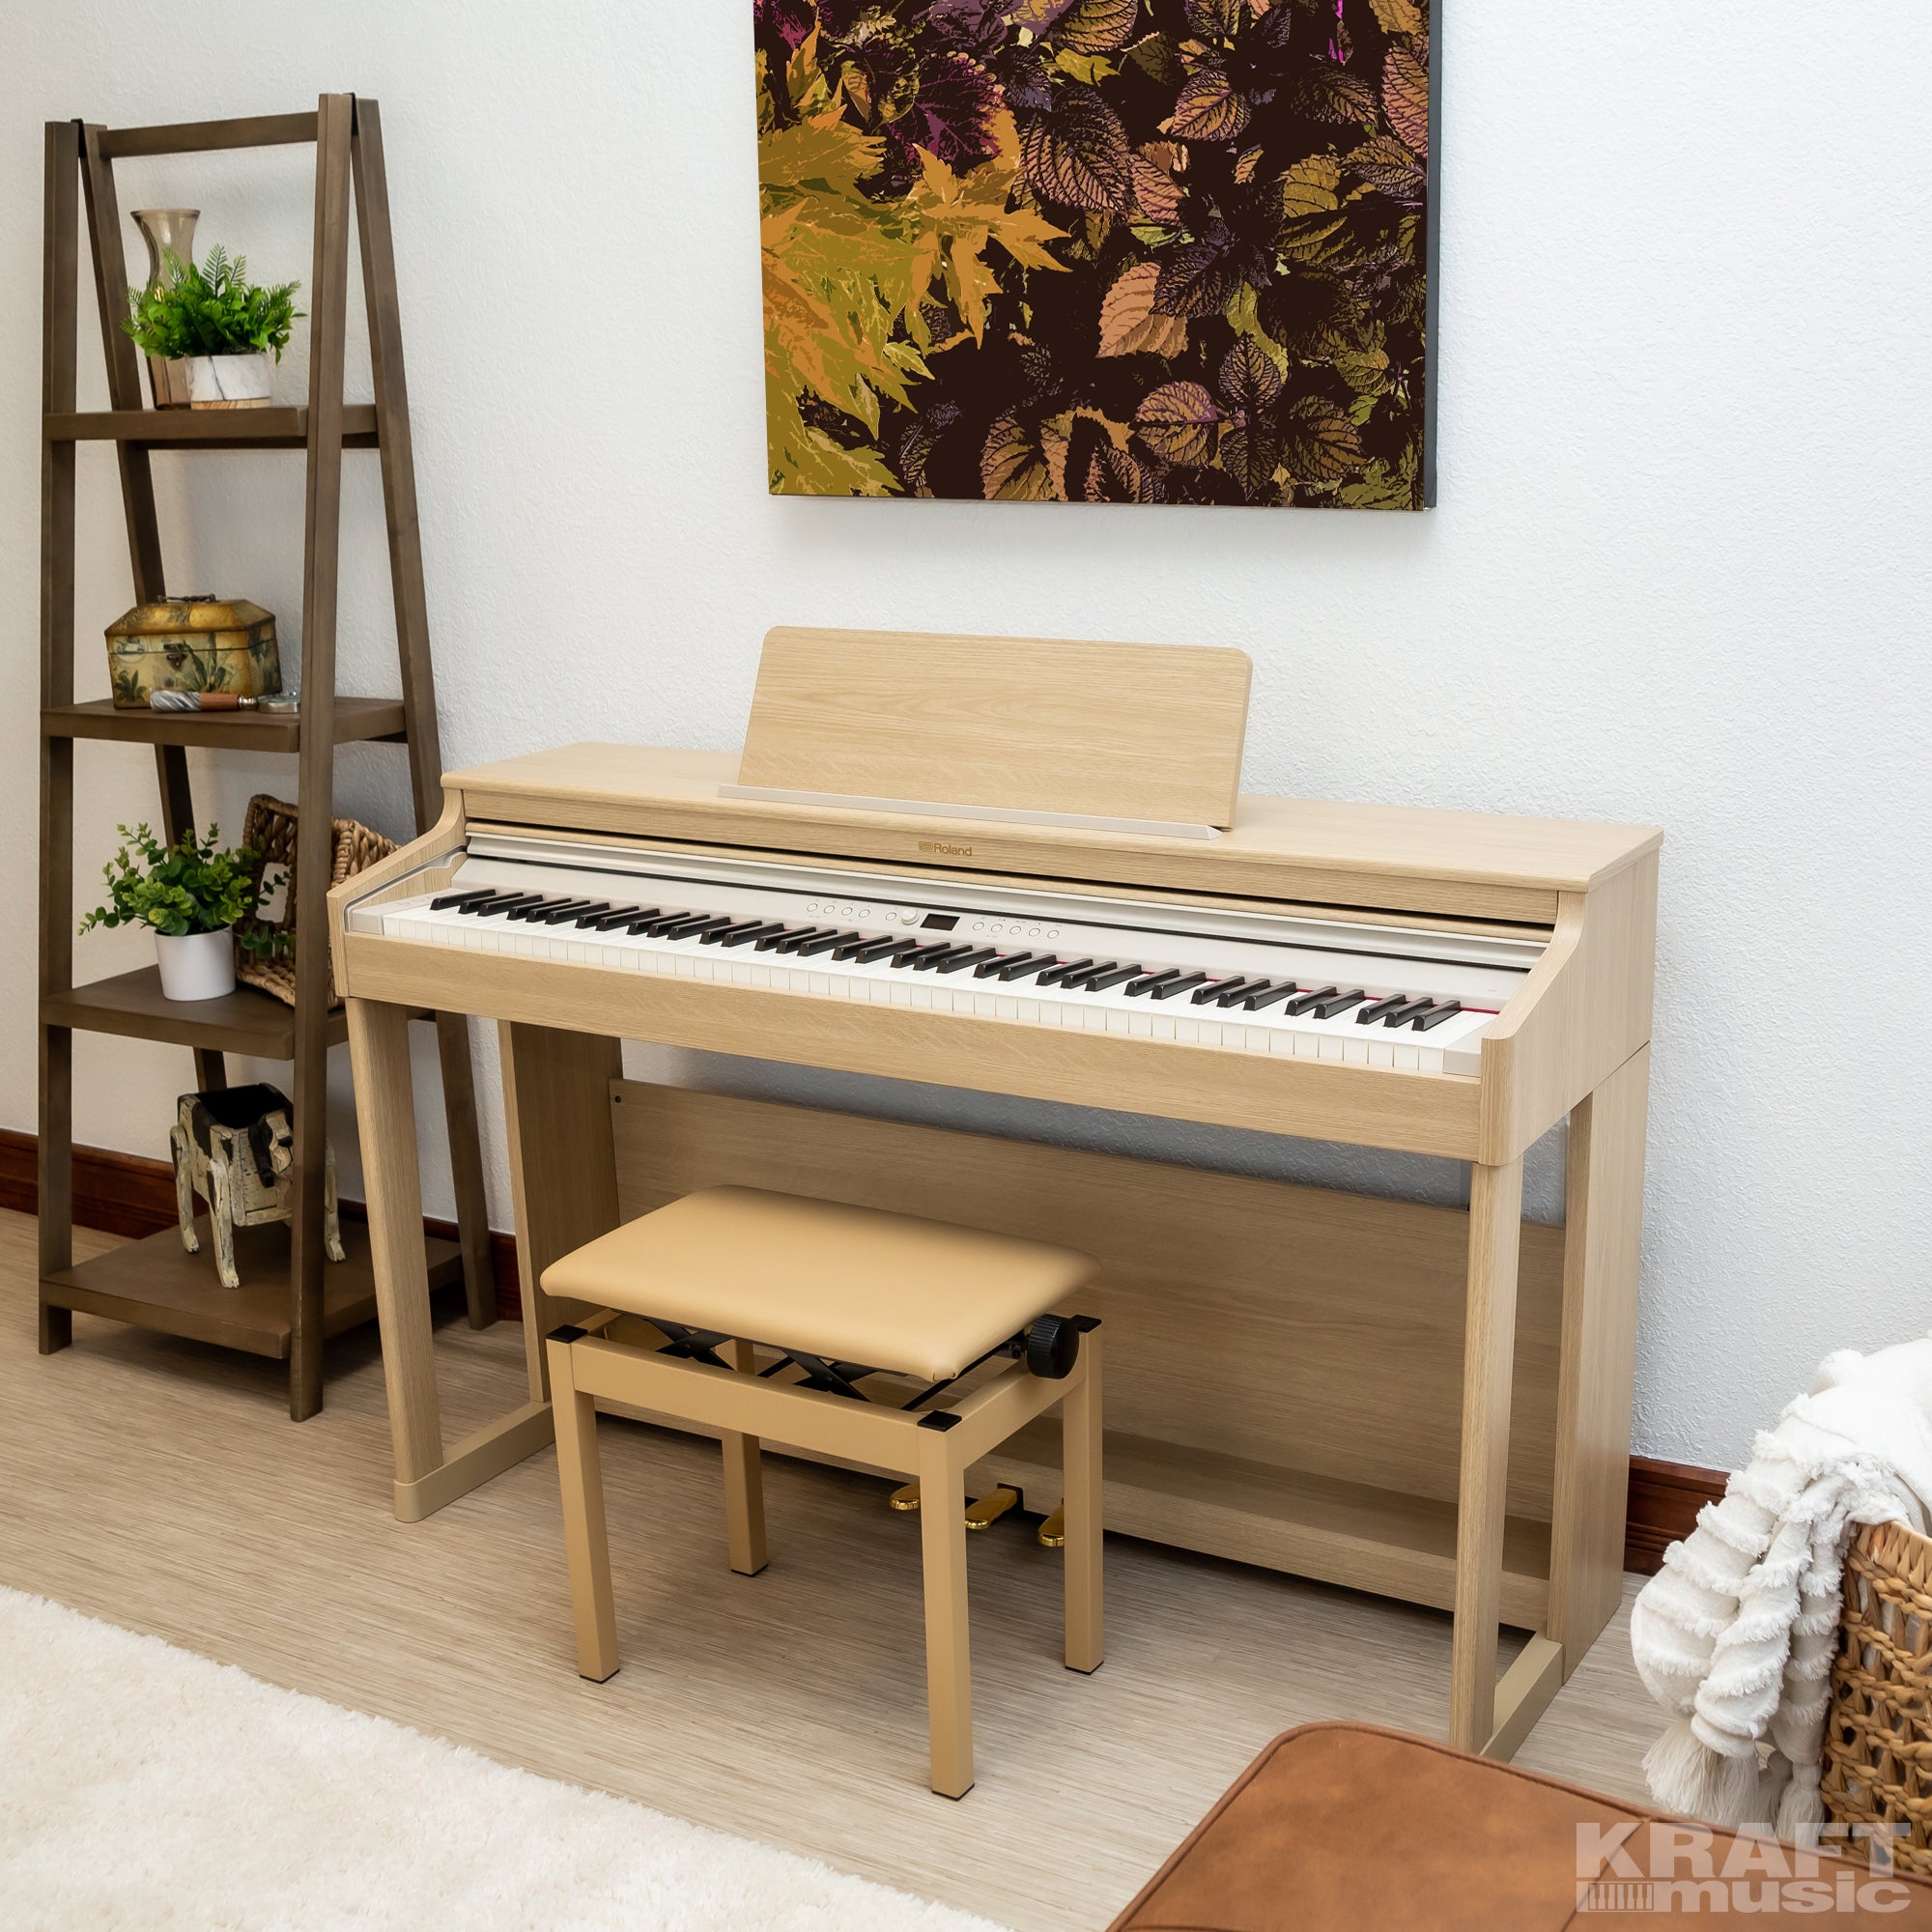 Roland RP701 Digital Piano - Light Oak - left facing in a stylish living room